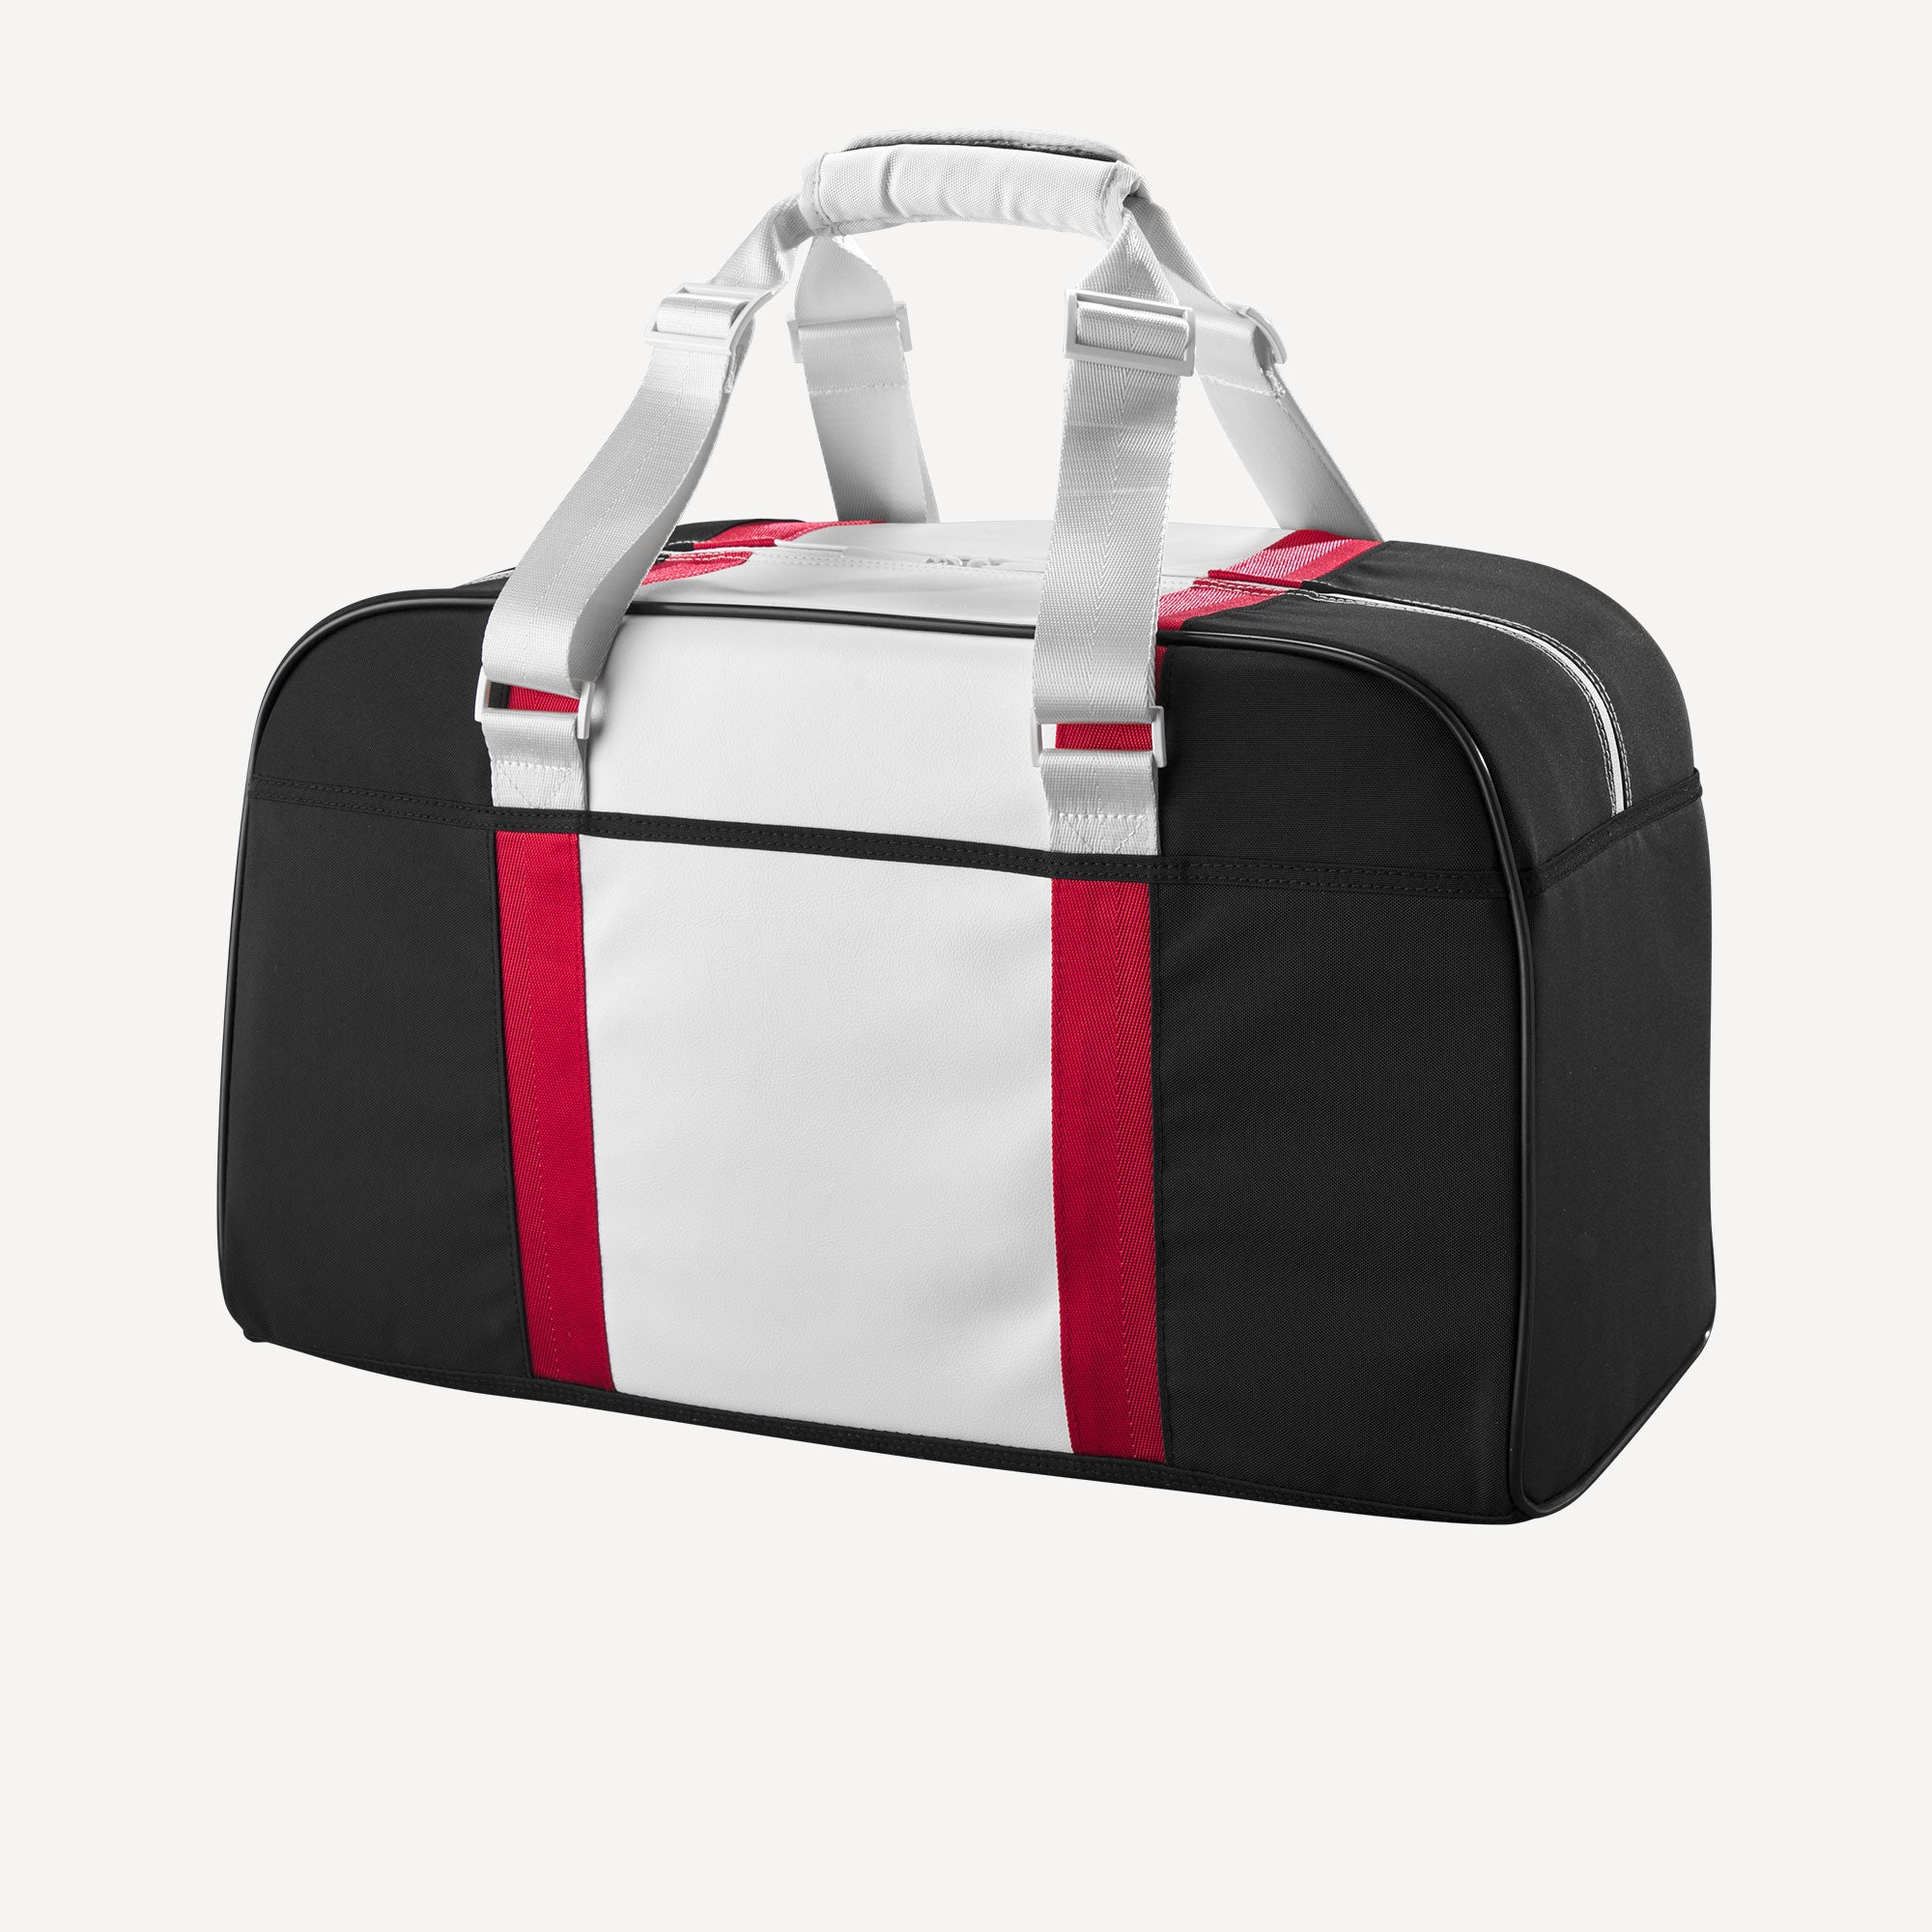 Wilson Courage Collection Small Duffle Tennis Bag - Black/White/Red (2)